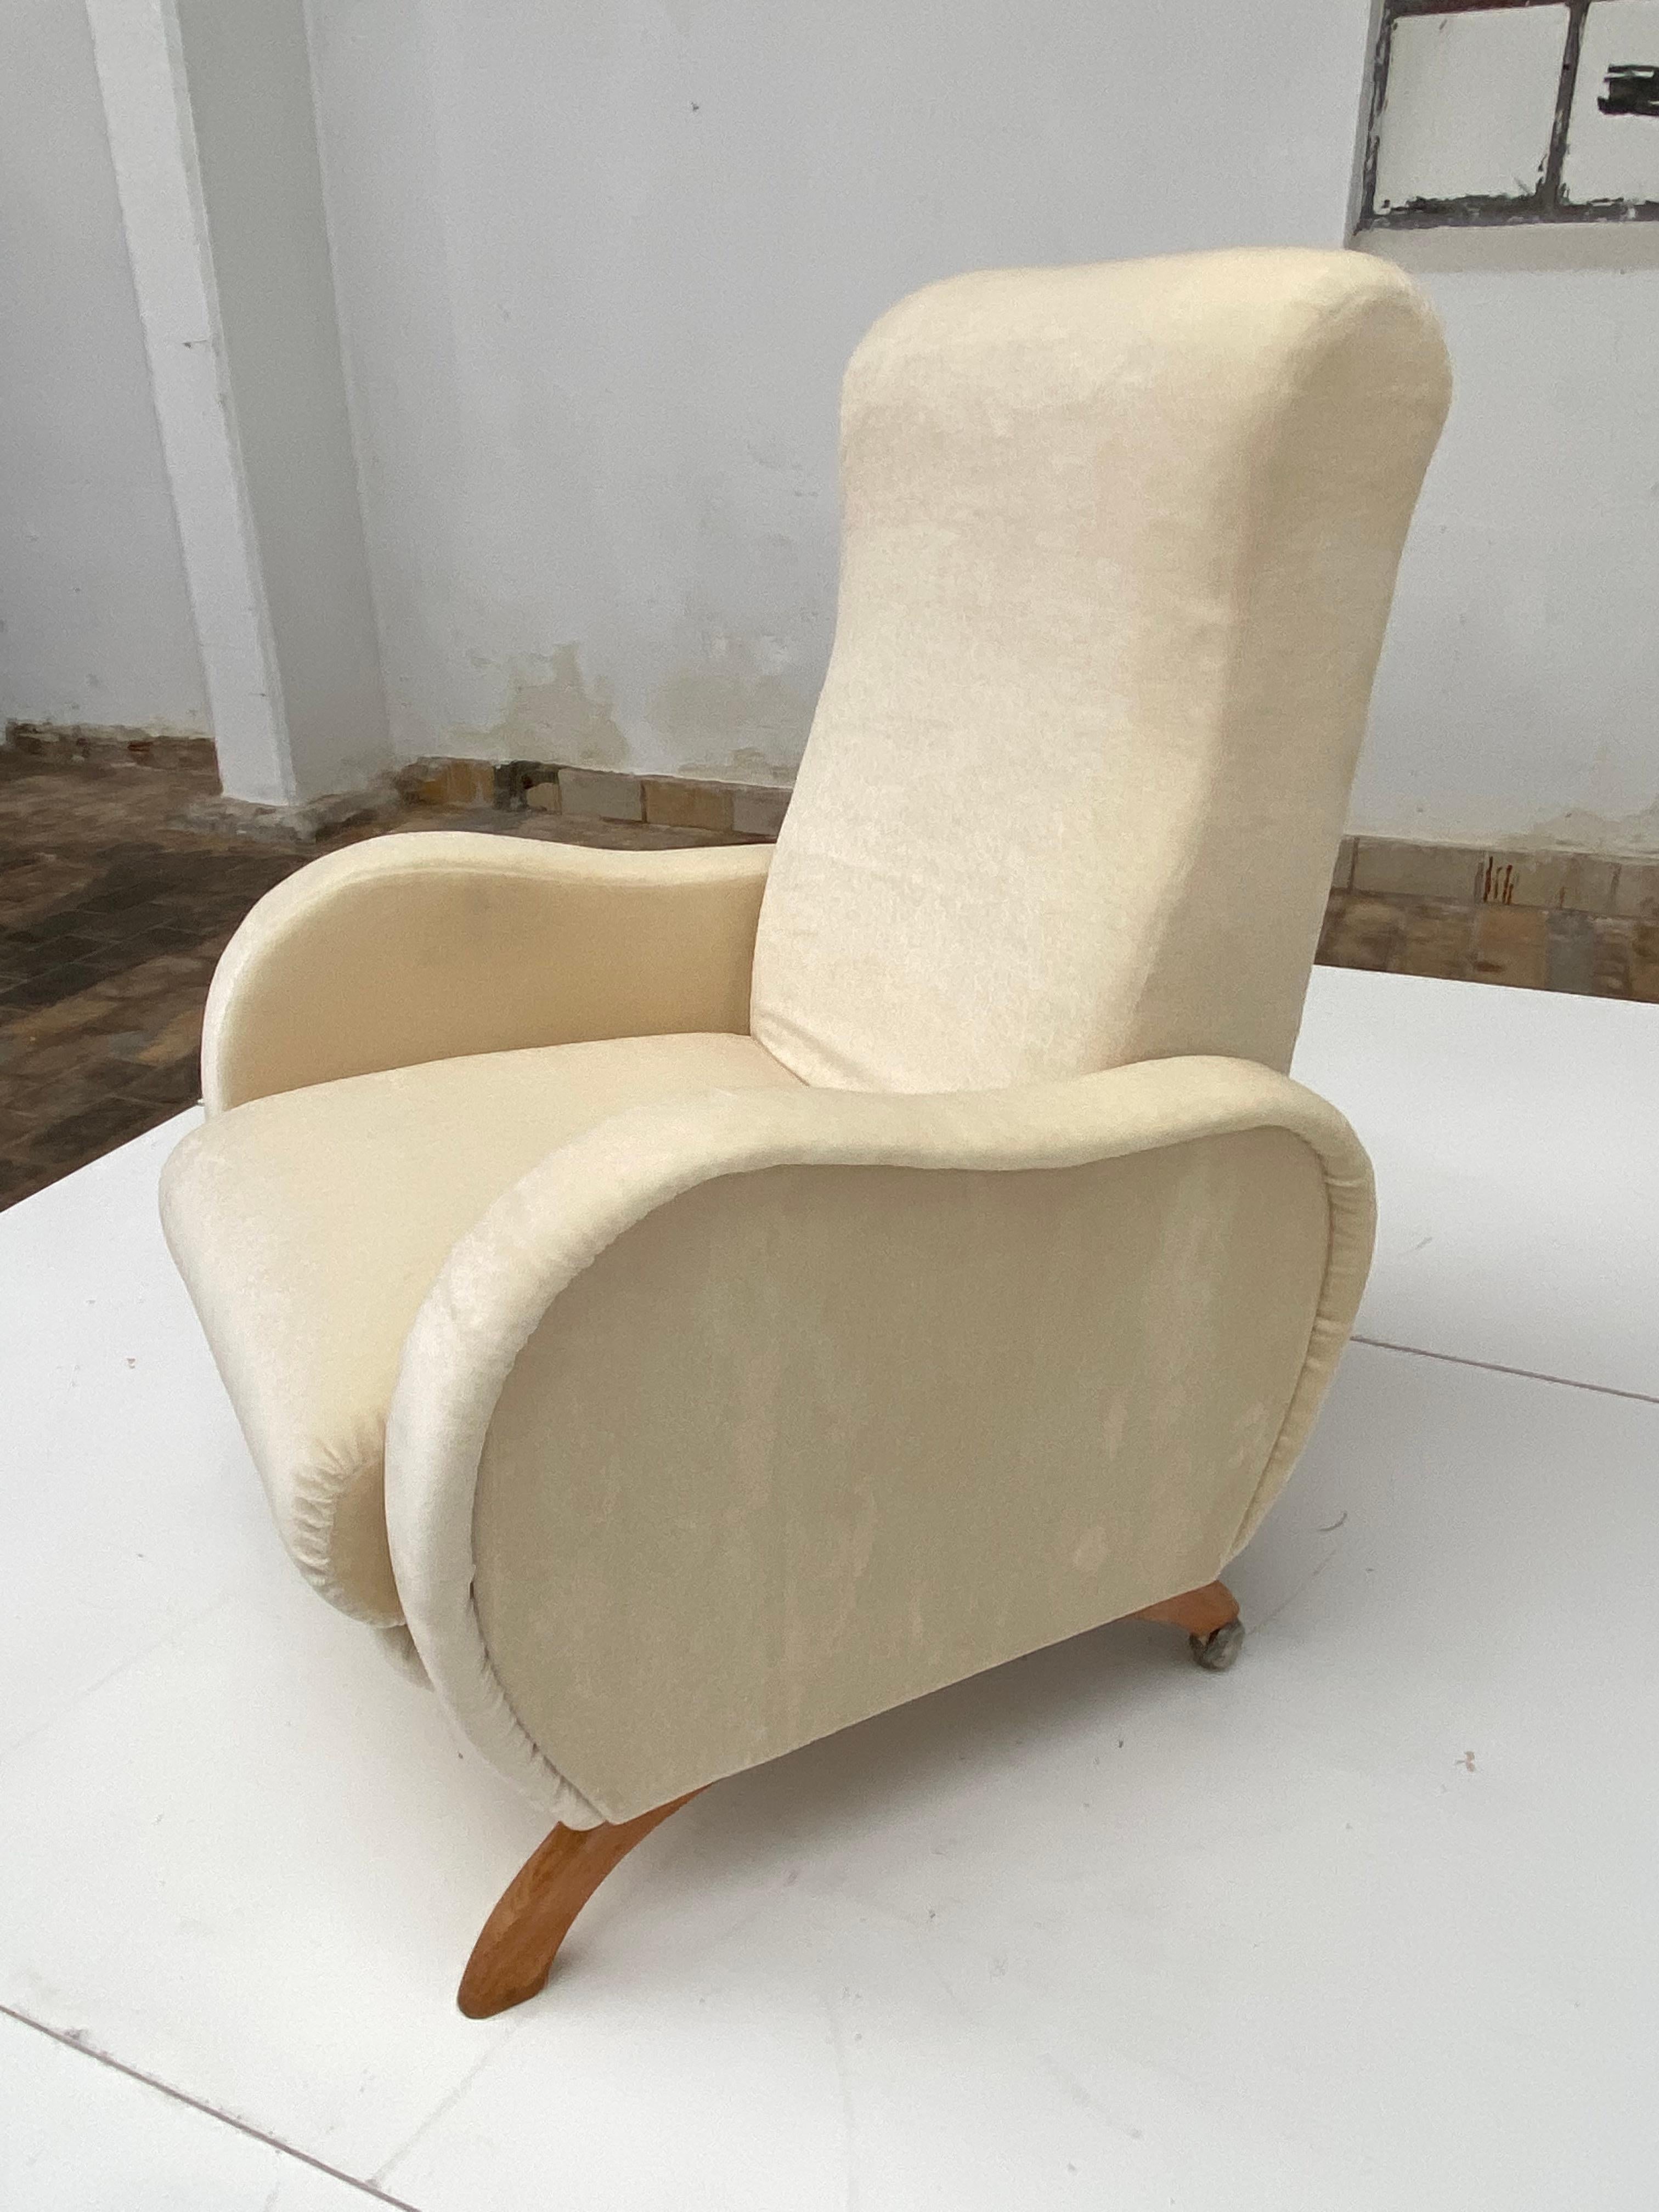 Fully restored heavy 1950's Belgian reclining lounge chair 

We used all new foam and authentic cotton materials for the interior finished up in a spectacular soft Mohair Velvet fabric by Dedar Milano 

Very comfortable chair that feels like a